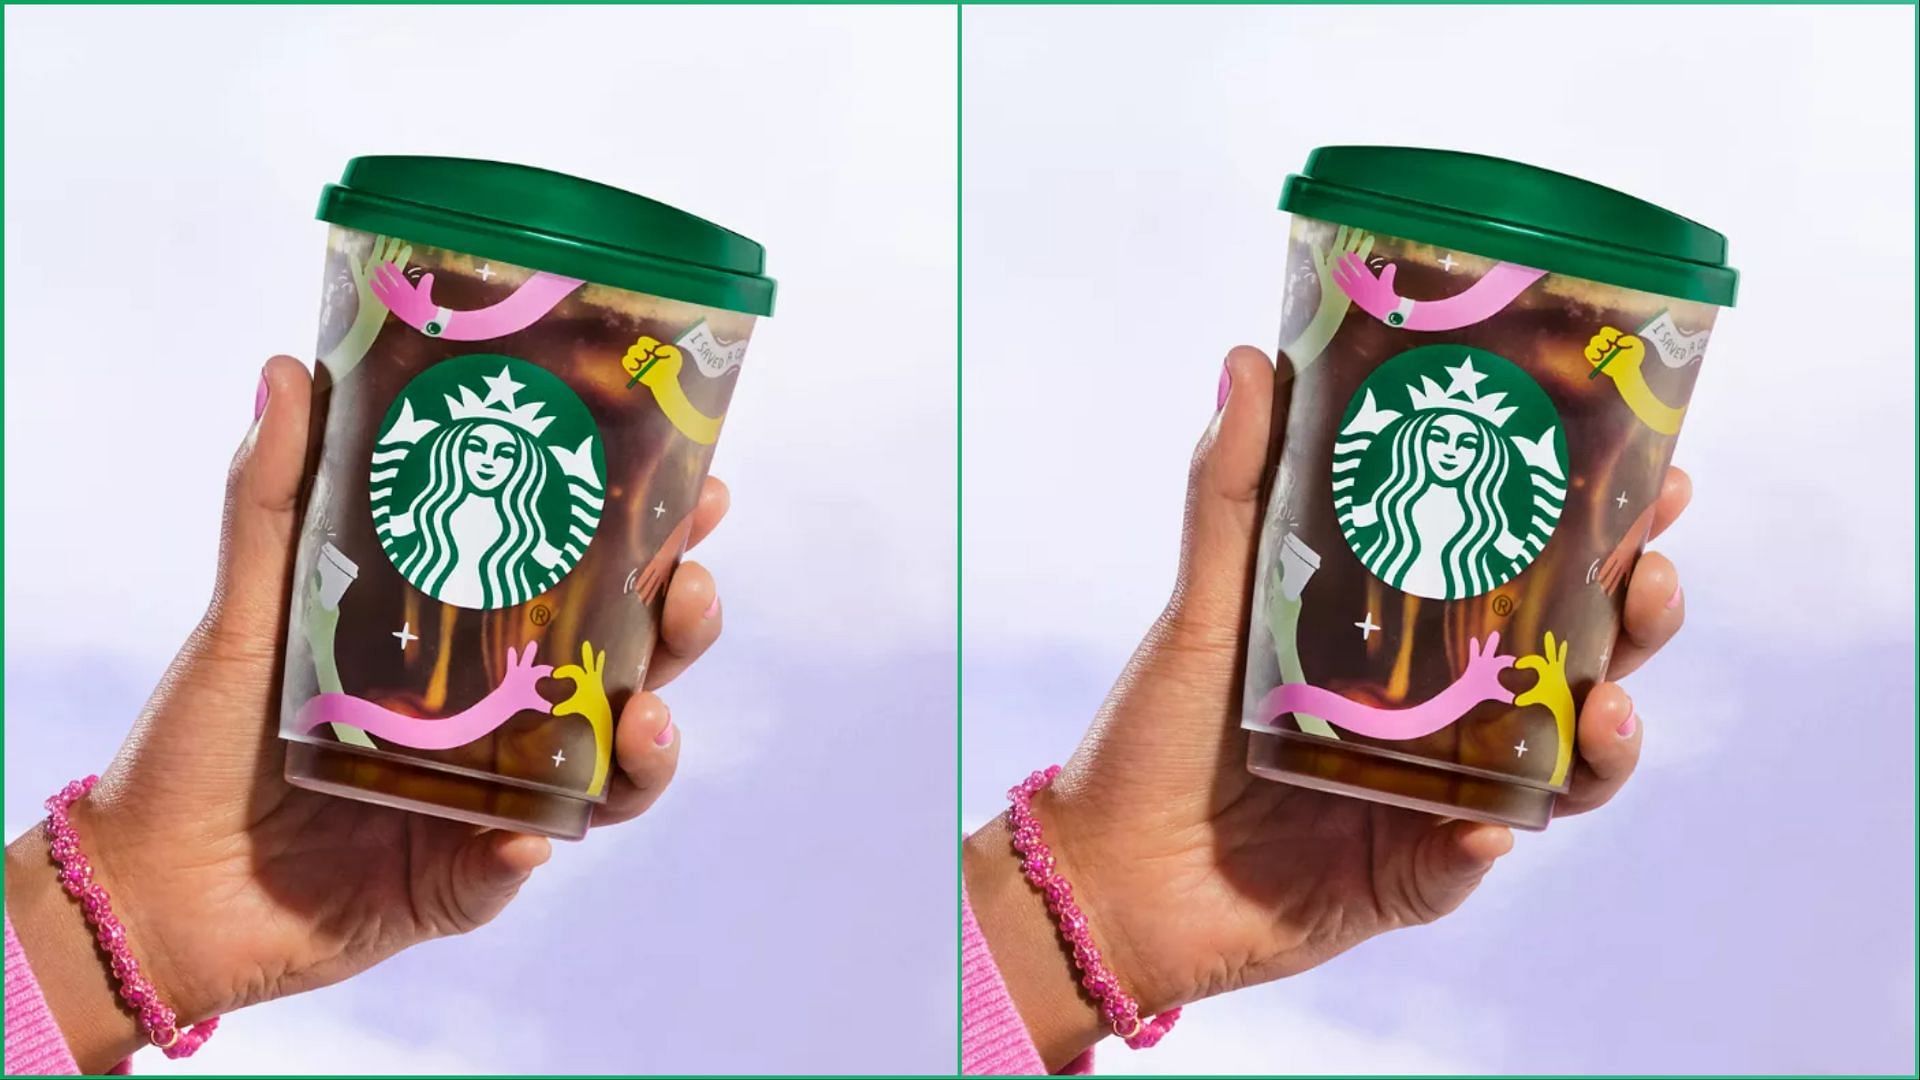 The free reusbale cups are only suitable for chilled or cold drinks (Image via Starbucks)